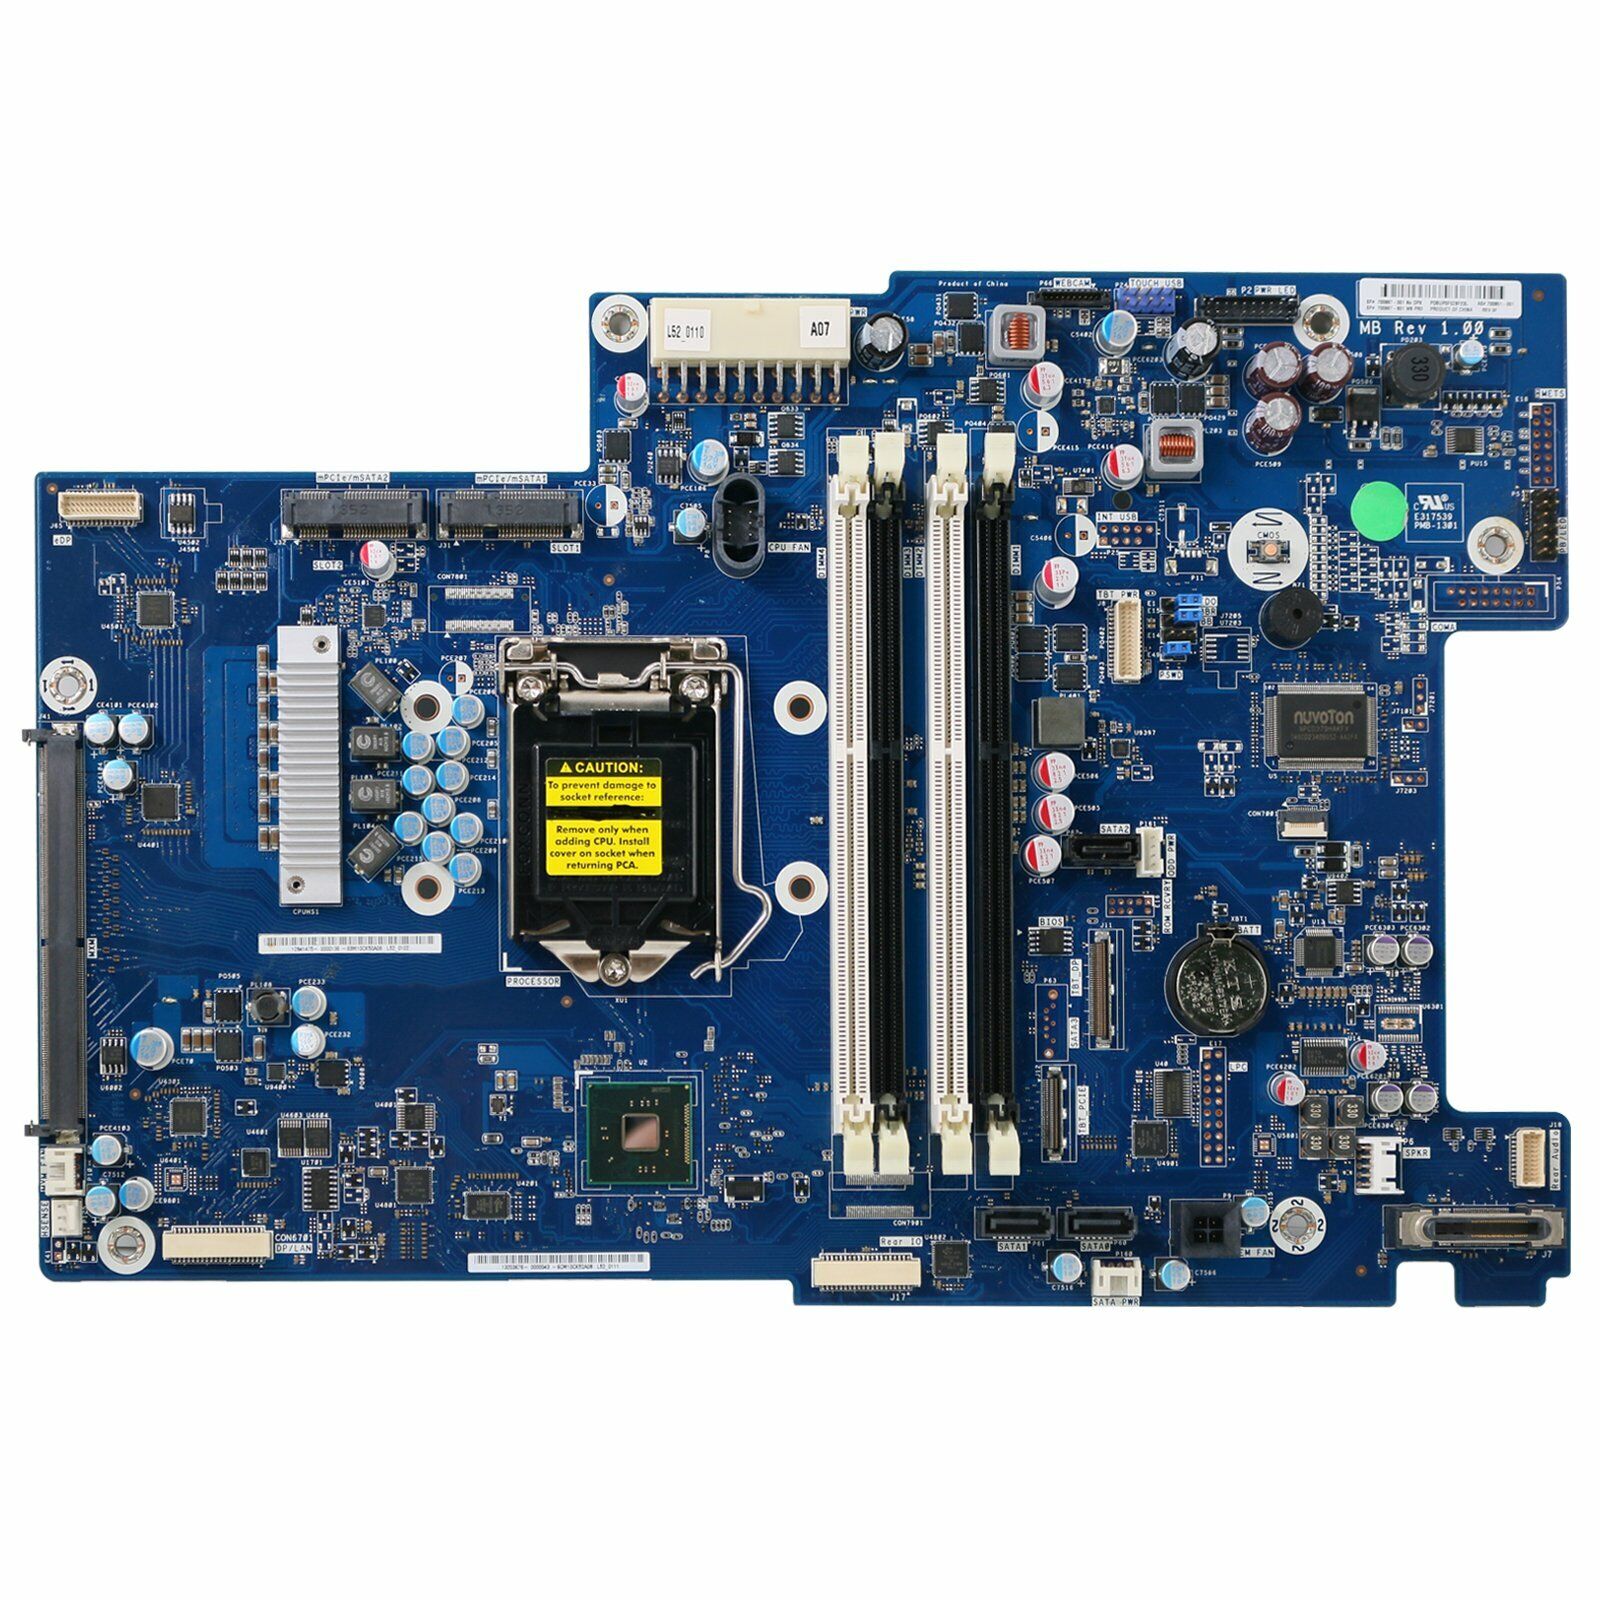 FOR HP Z1 G2 Workstation all-in-one Motherboard 700951-001 700997-001 700997-601